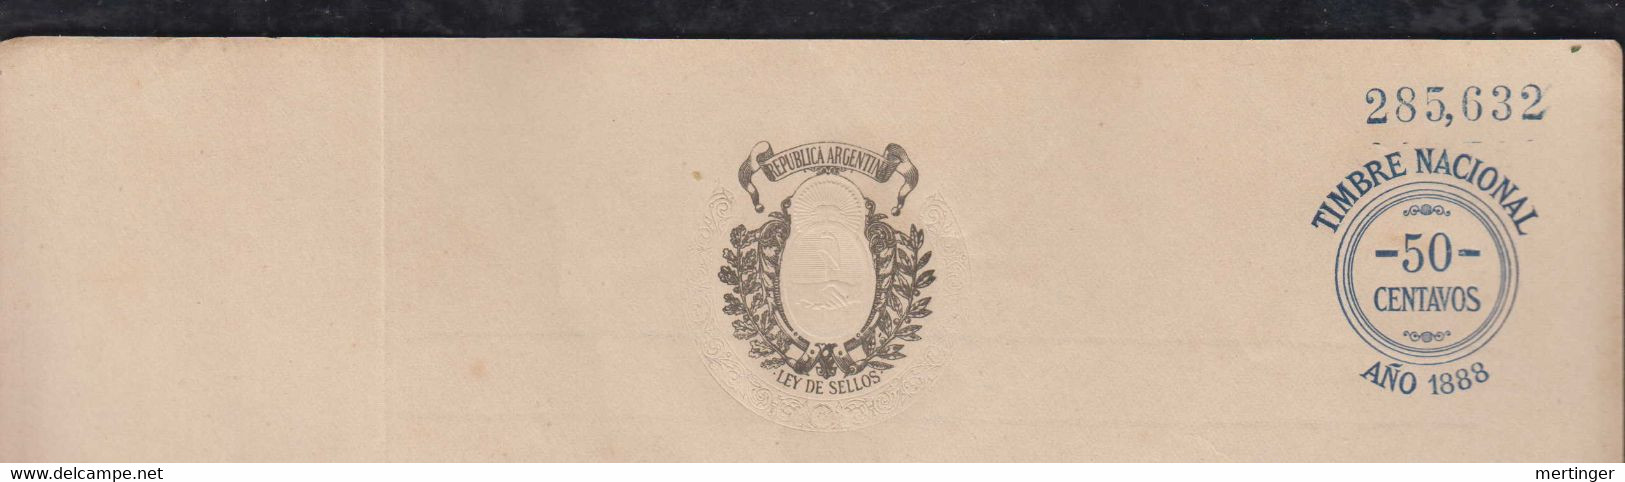 Argentina 1888 Revenue Fiscal Document Stationery Mint TIMBRE NACIONAL 50 Centavos - Covers & Documents